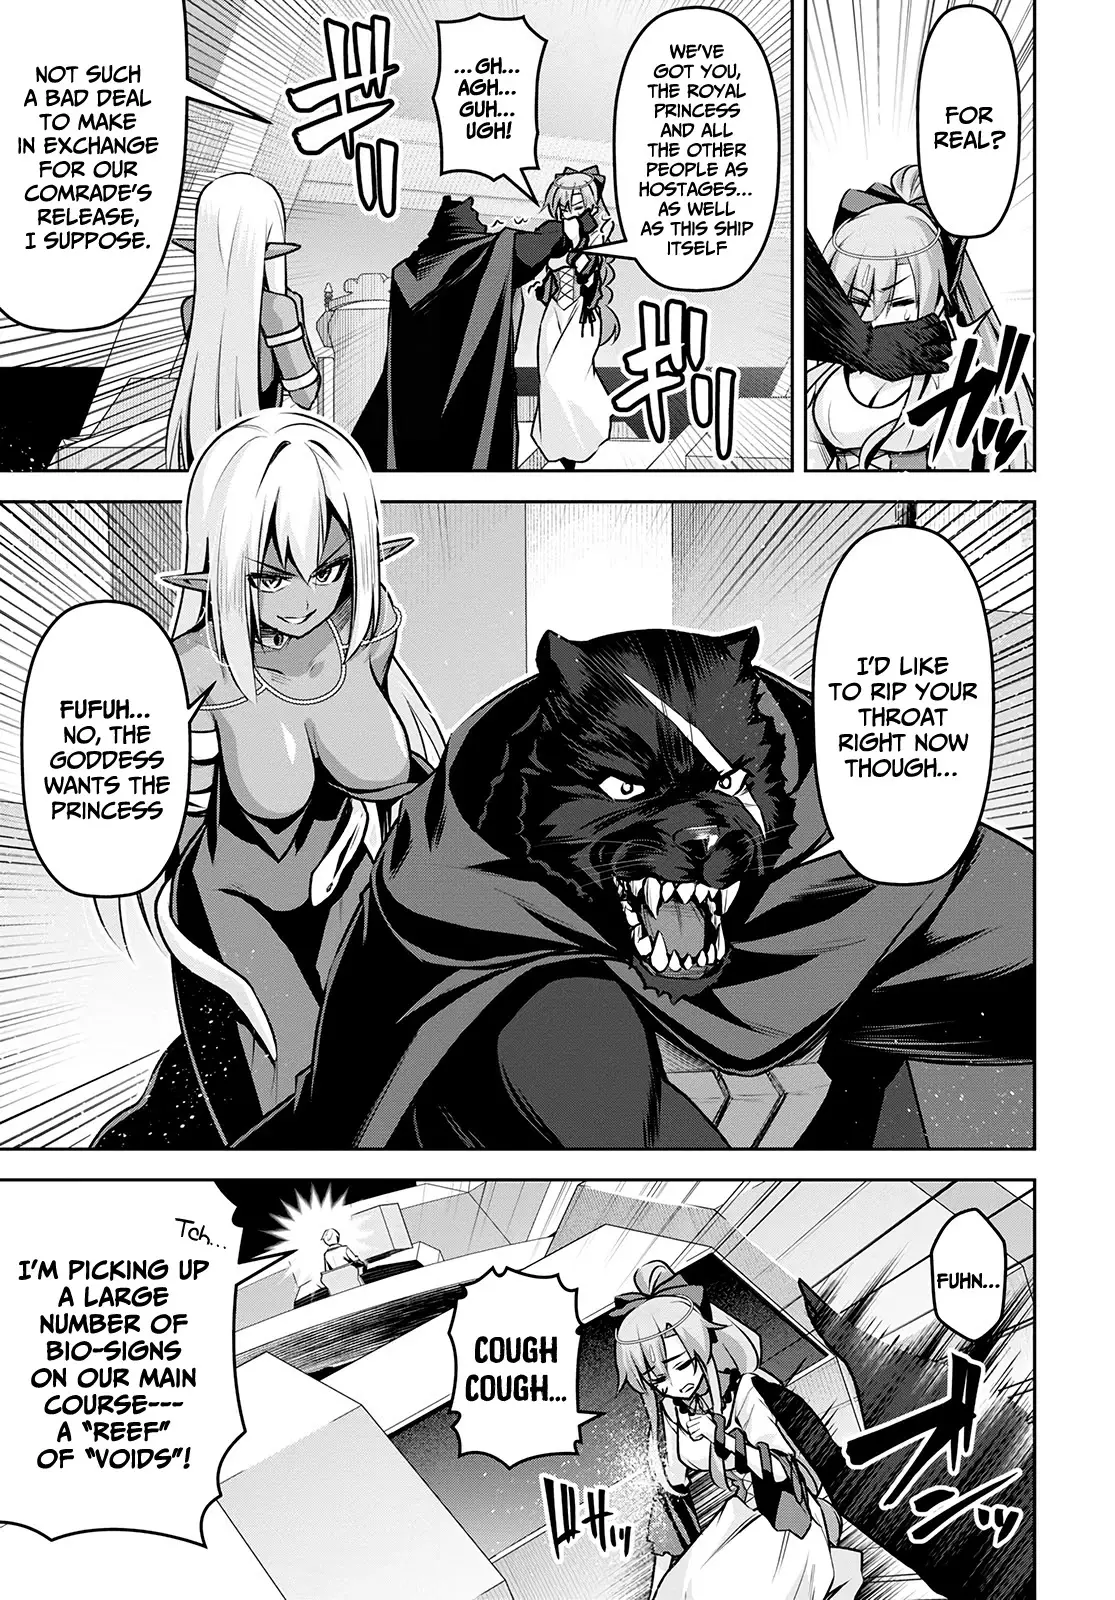 Demon's Sword Master Of Excalibur School - 17 page 20-31bfded7